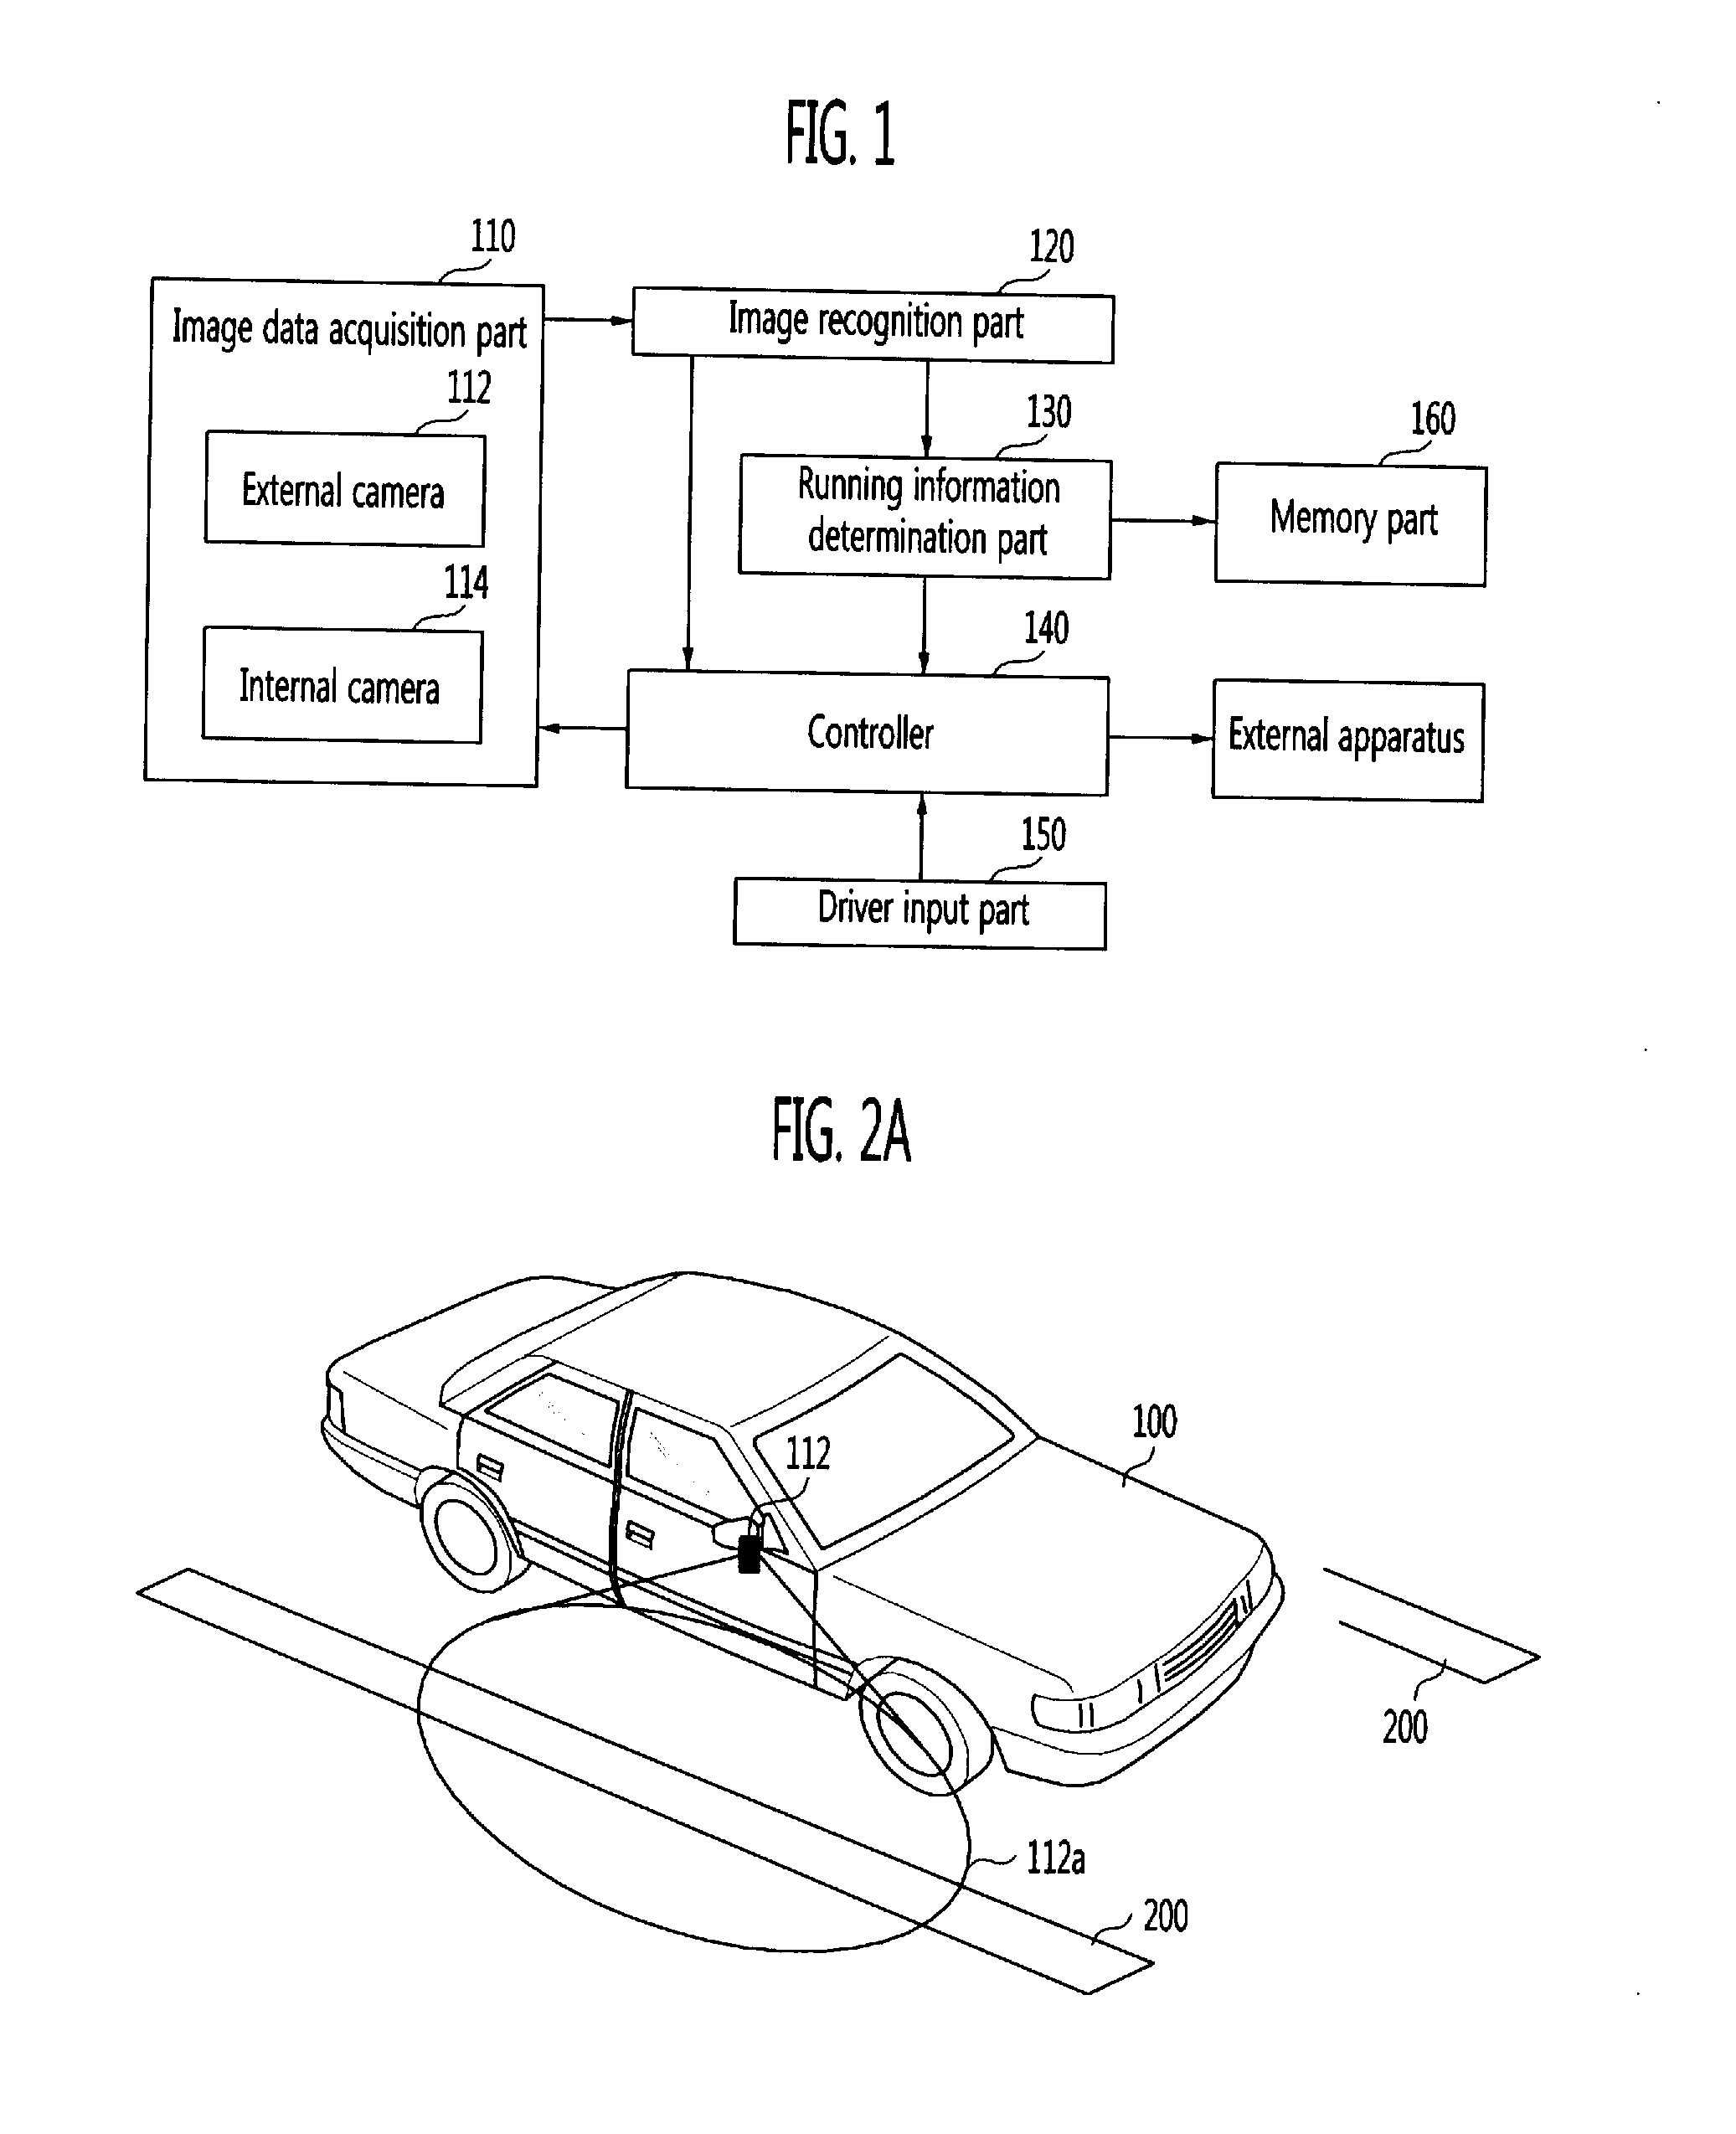 Apparatus and method for preventing collision of vehicle